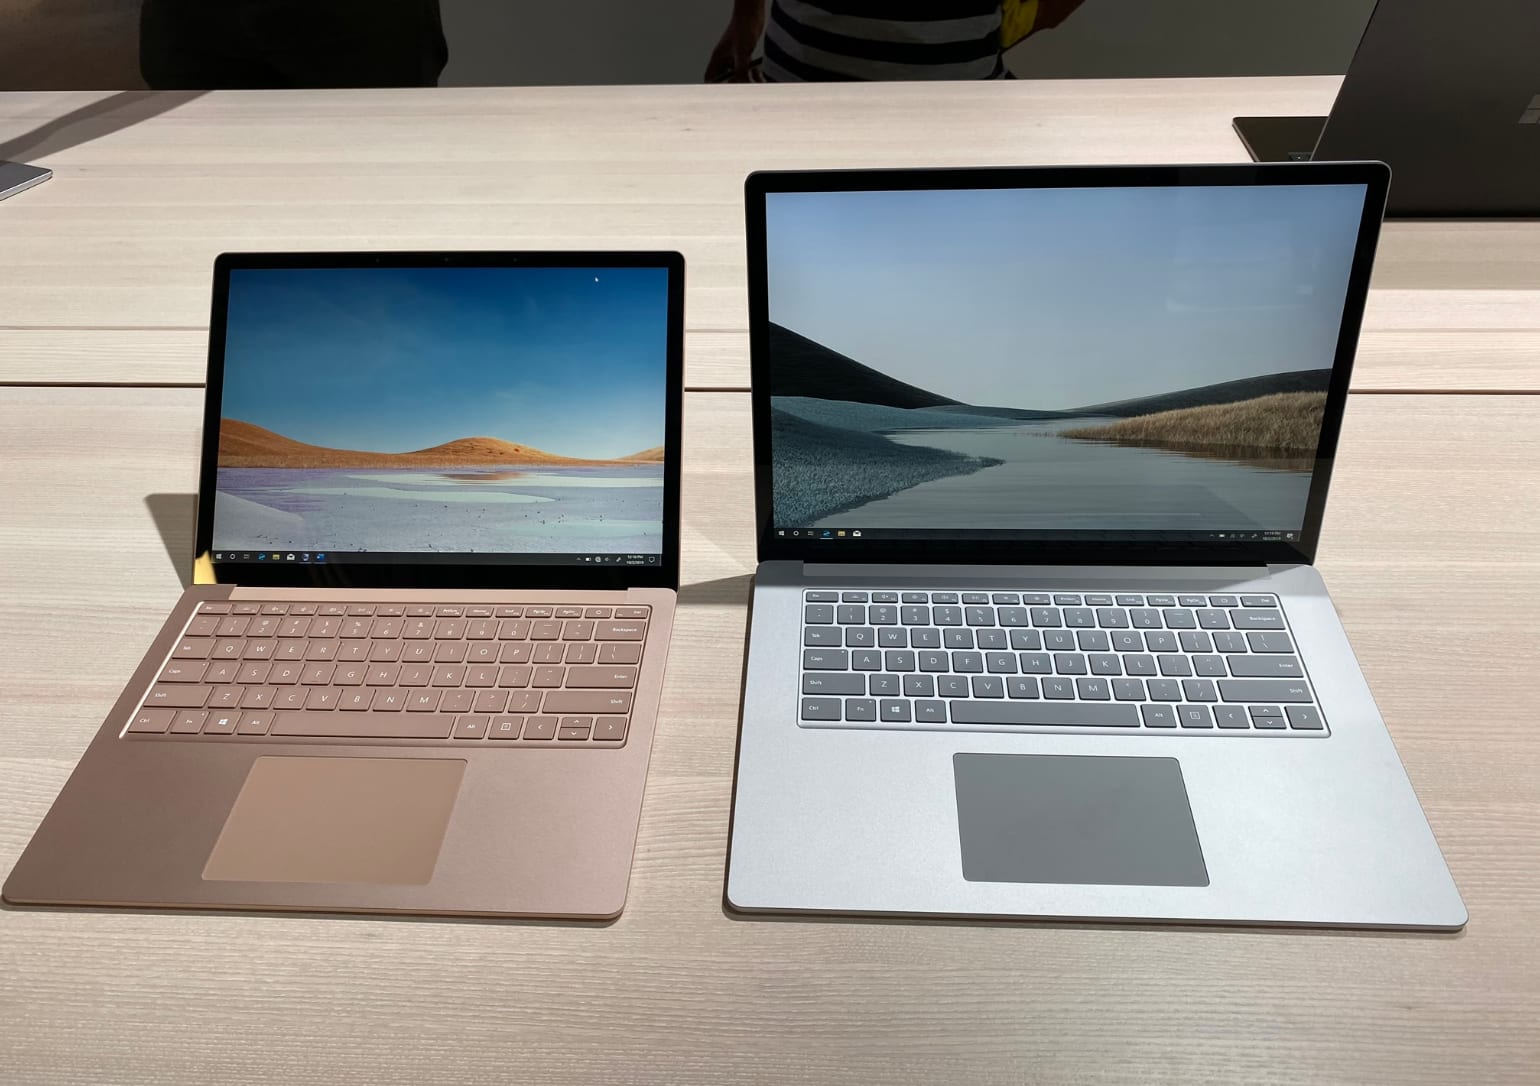 Dell XPS 15 7590 (2019) vs Microsoft Surface Book 2: Which one to buy? - The Style Inspiration